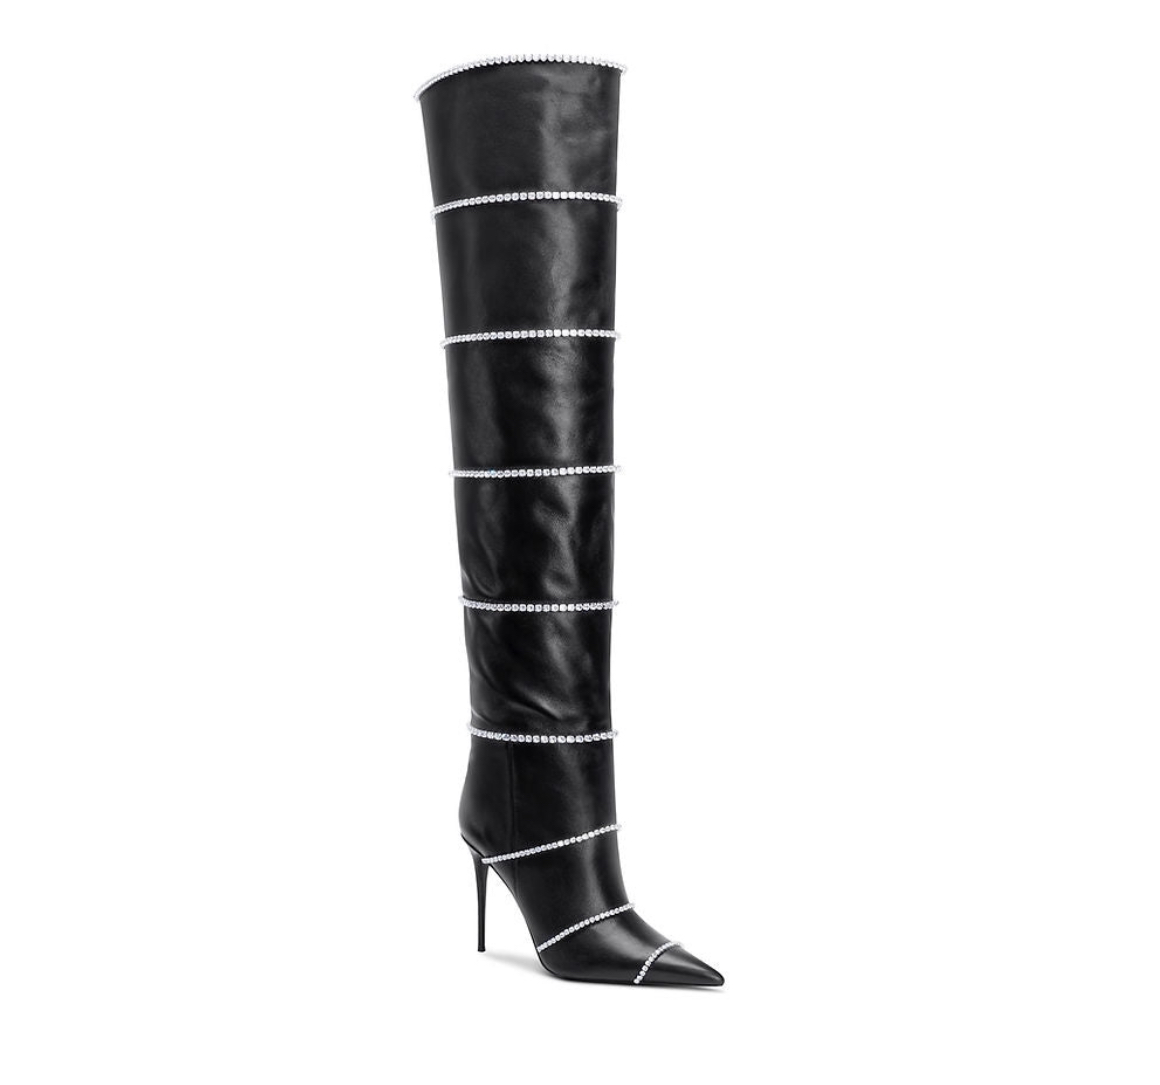 Fashion Bomb Daily Shop Fall Must Have Boots to Add to Your Wardrobe Including Designers SYBGCO and Voyette Lee 4